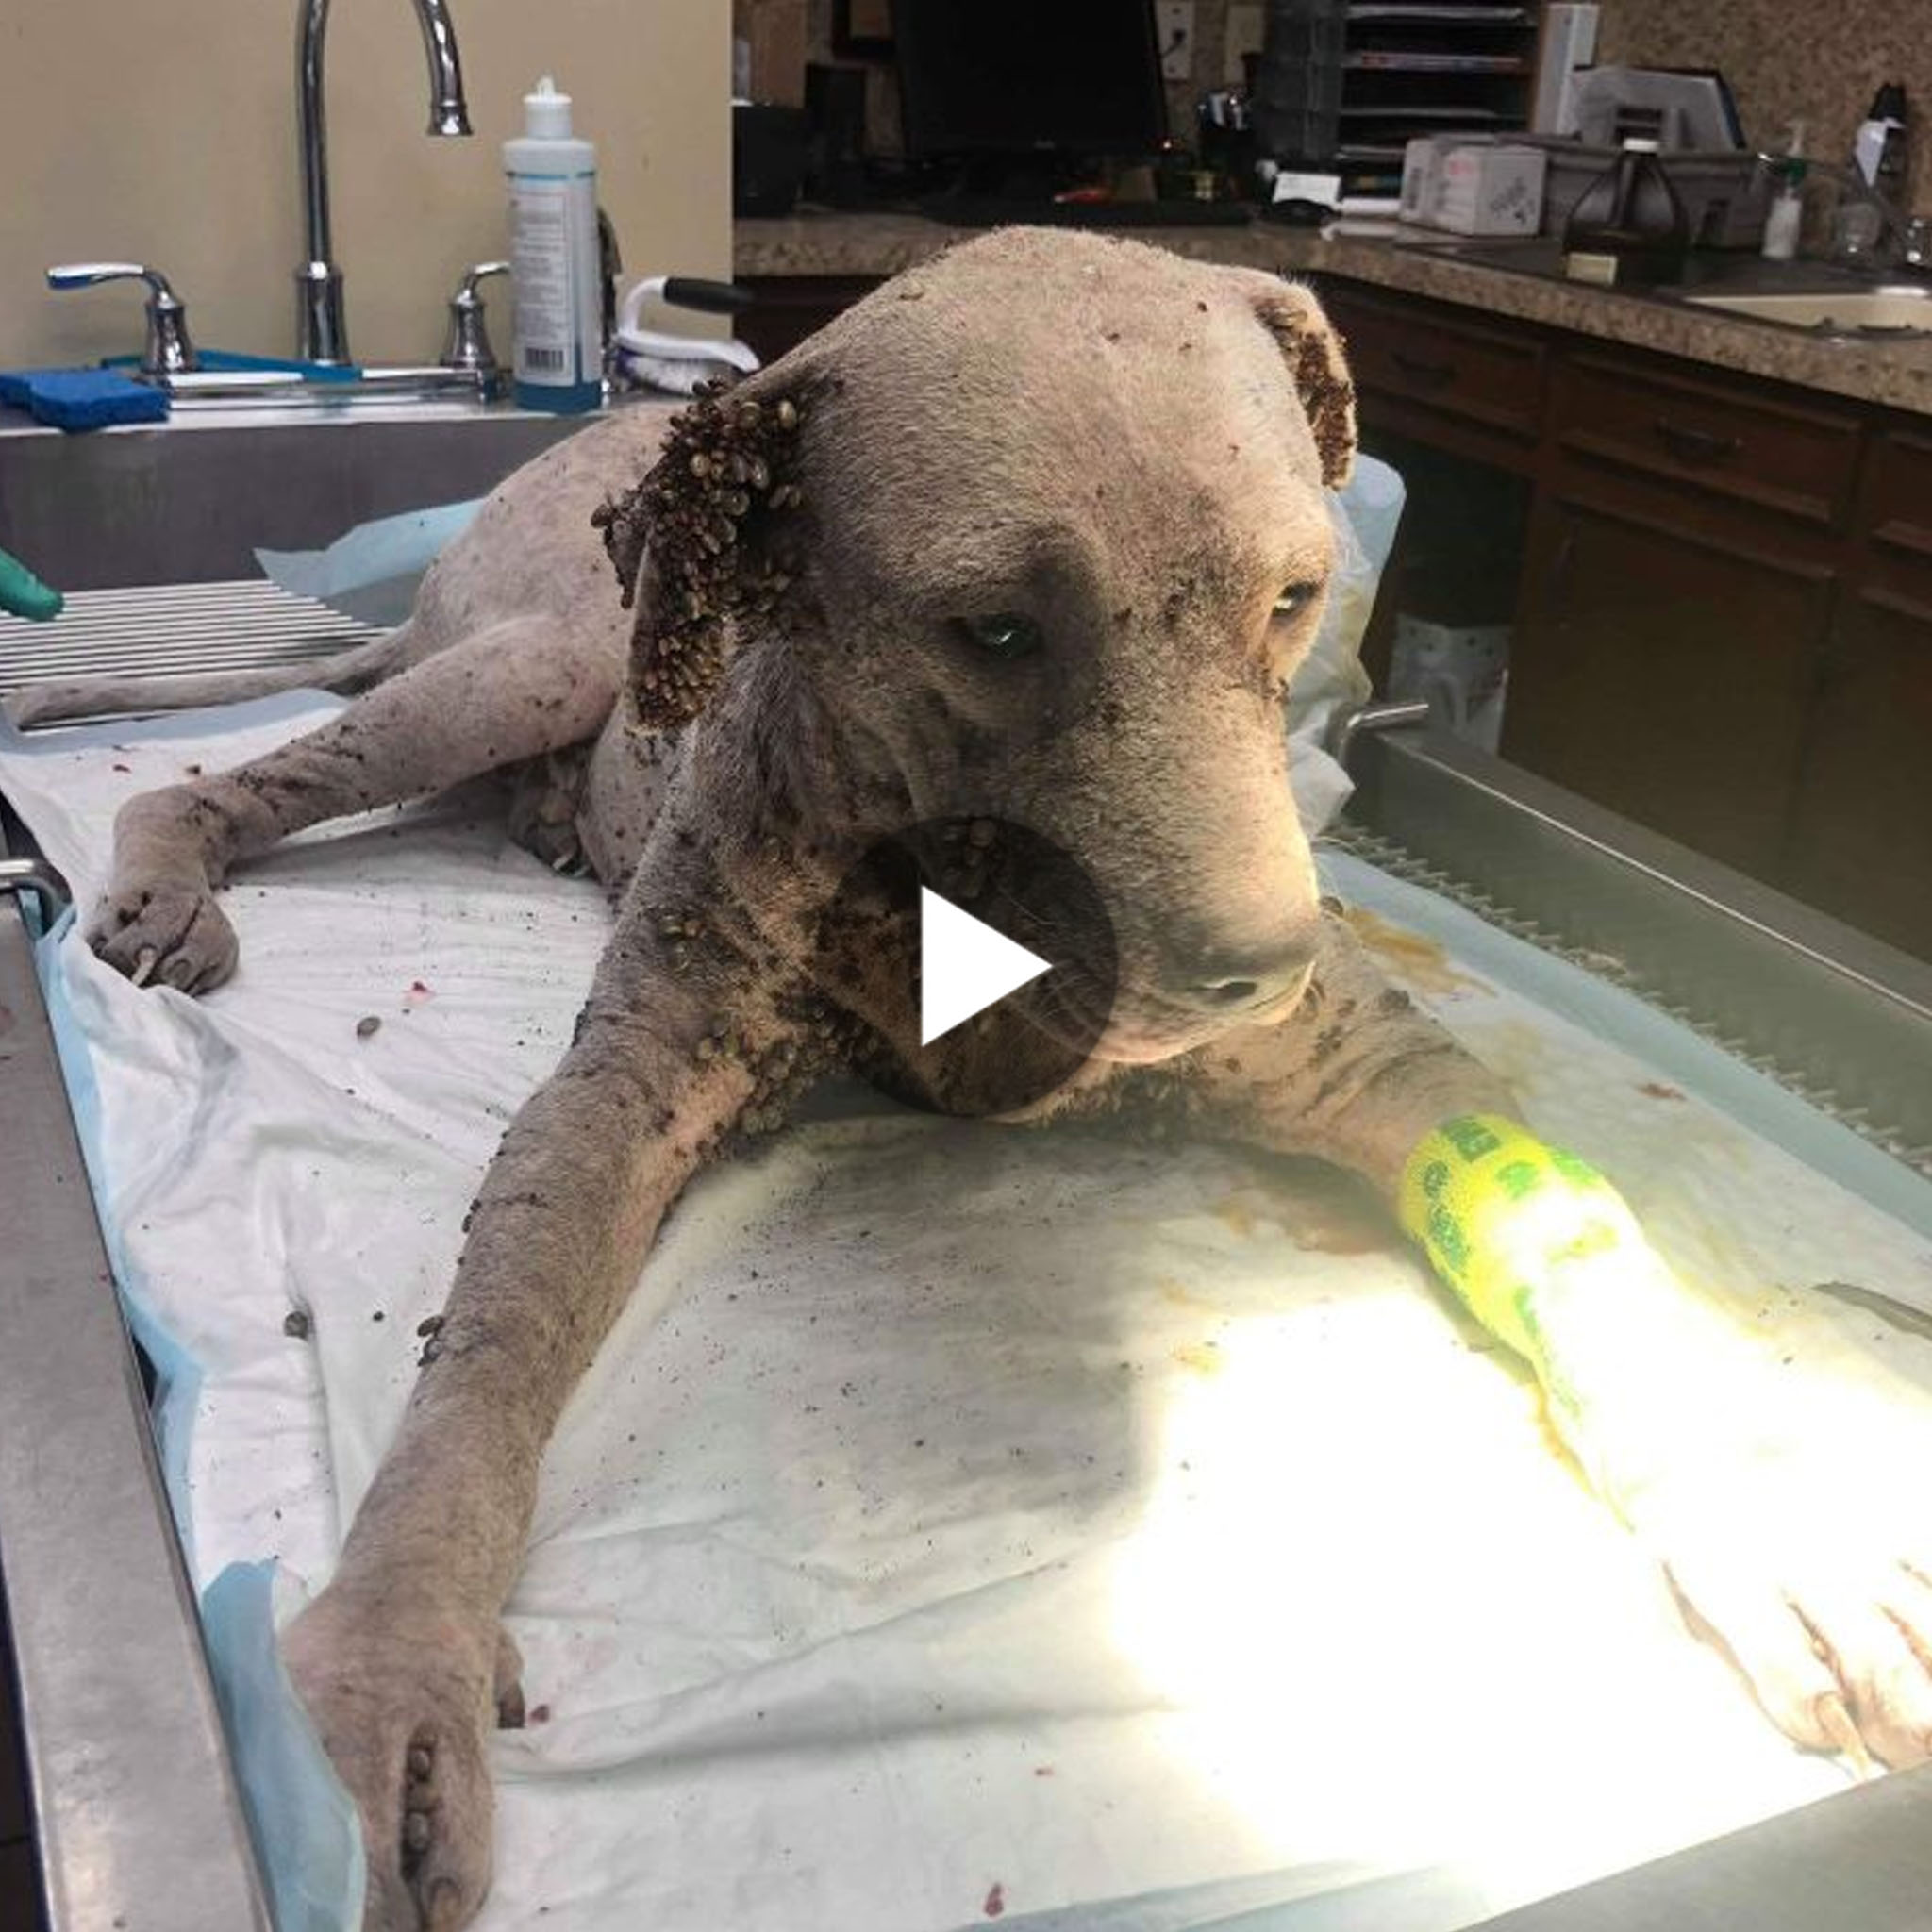 tho “A Stray Puppy, Tormented by Tick Attacks, Becomes So Weakened by Illness and Disease that He Can Barely Endure It, Leaving Netizens Moved.” tho